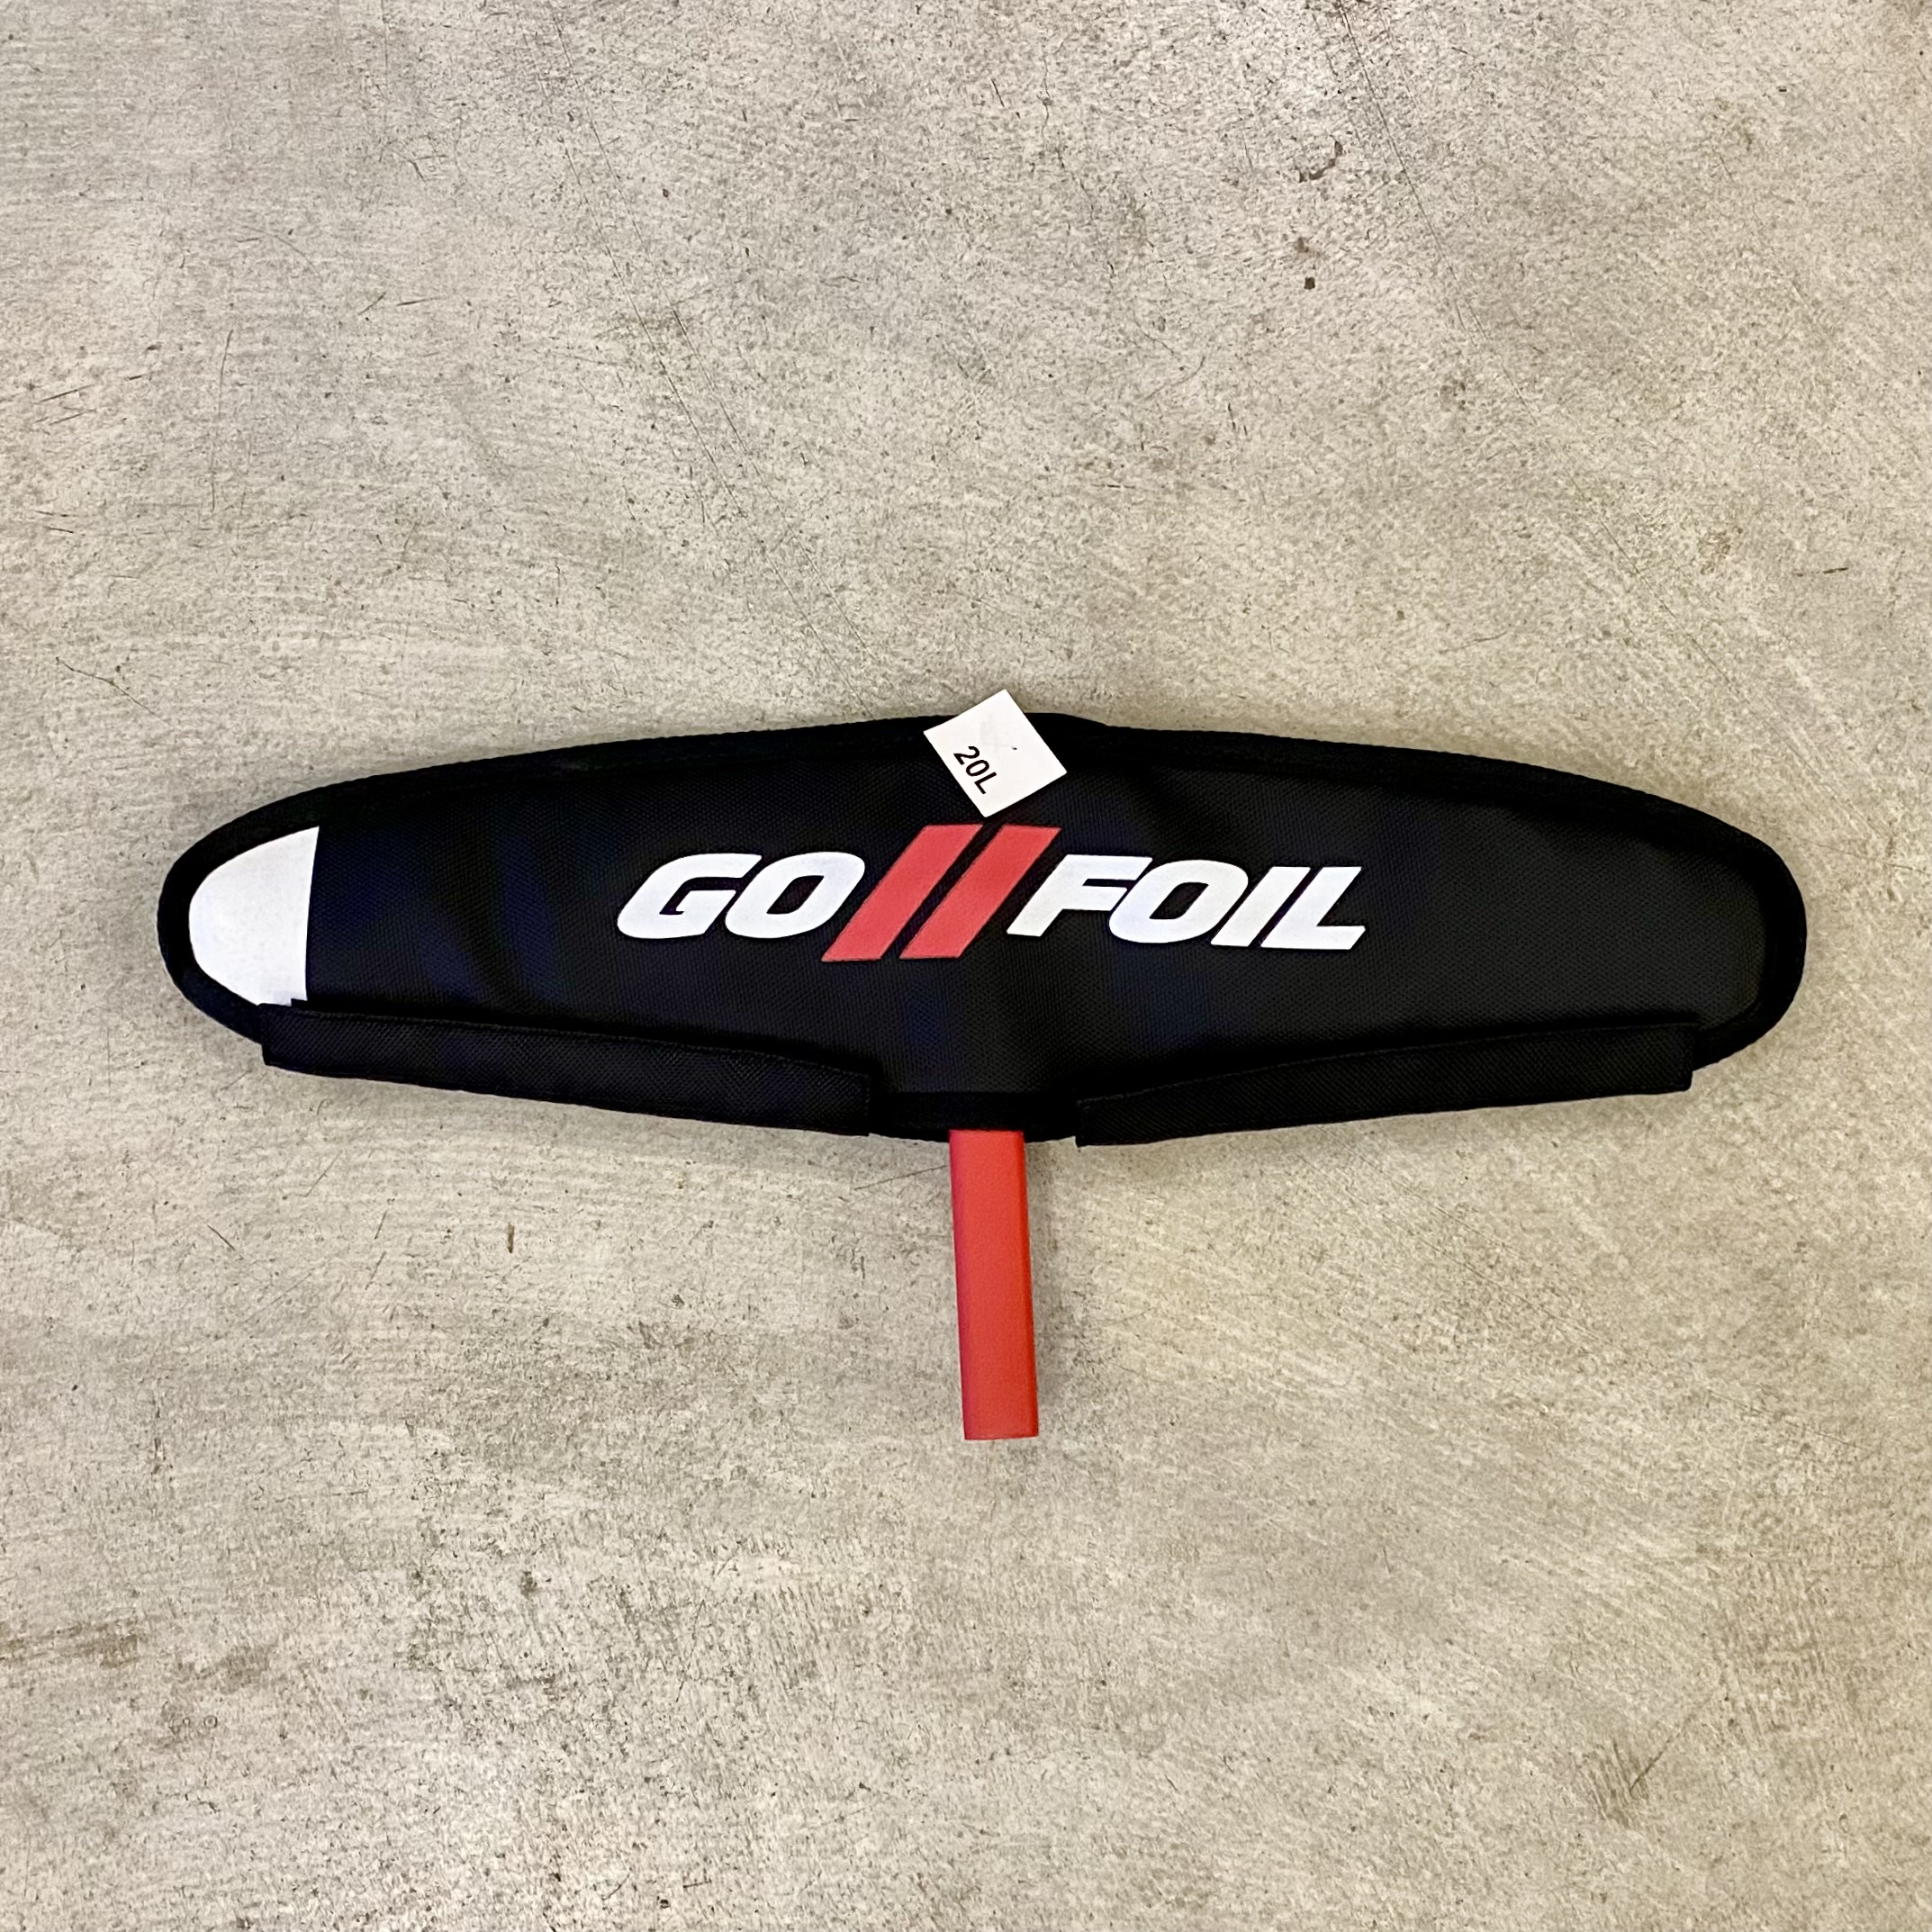 GO FOIL バックウイング Fixtail14.5ロング　純正ケース付き